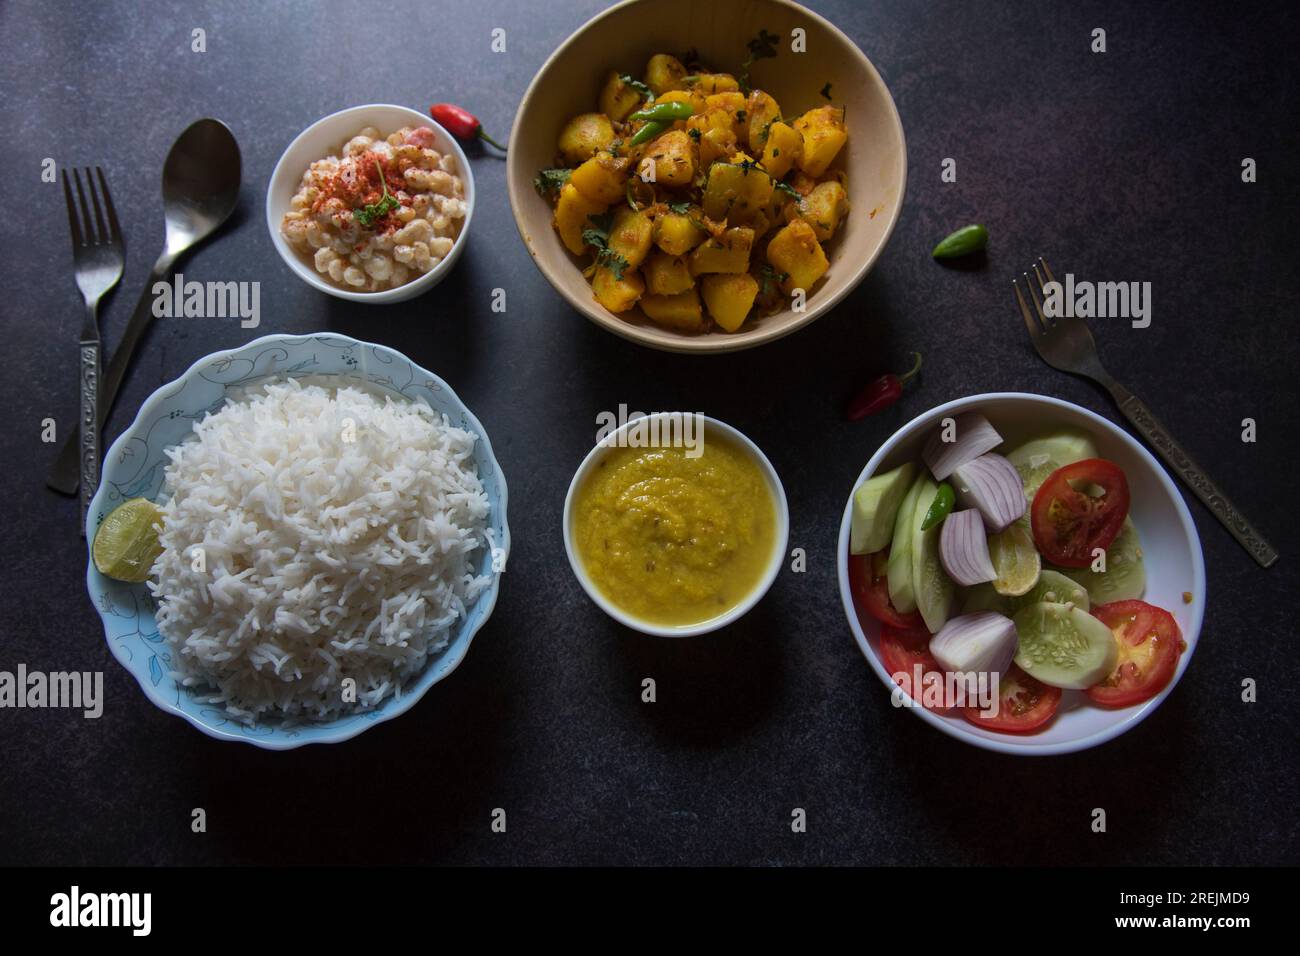 Ready to eat Indian veg lunch menu served. Top view Stock Photo